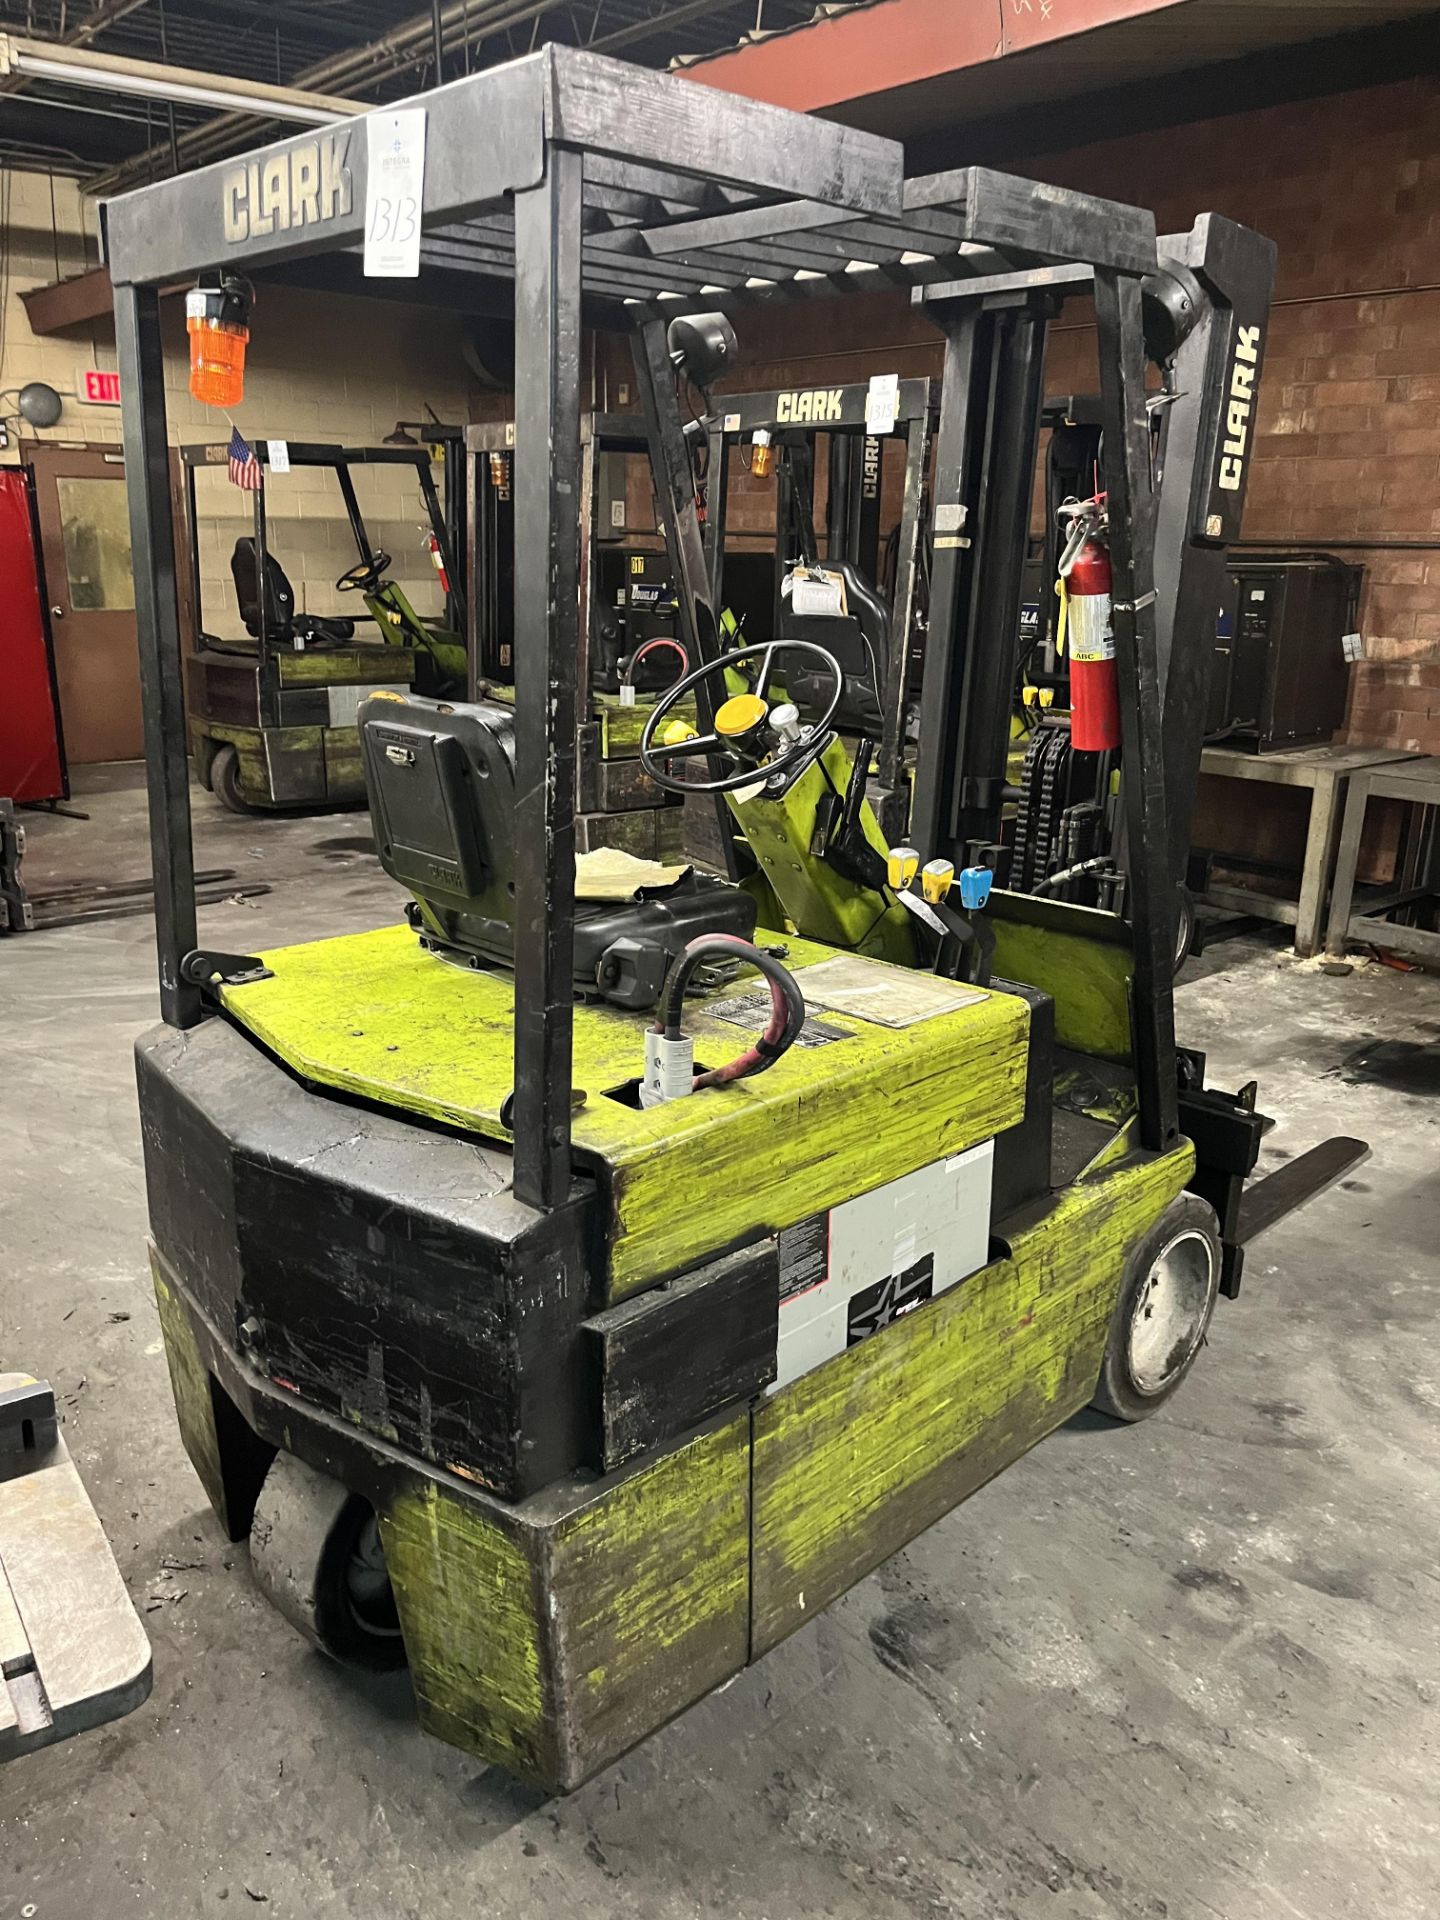 Clark TM20 4,000-Lb Electric Forklift Truck (DELAYED DELIVERY - Available February 3, 2023) - Image 2 of 4